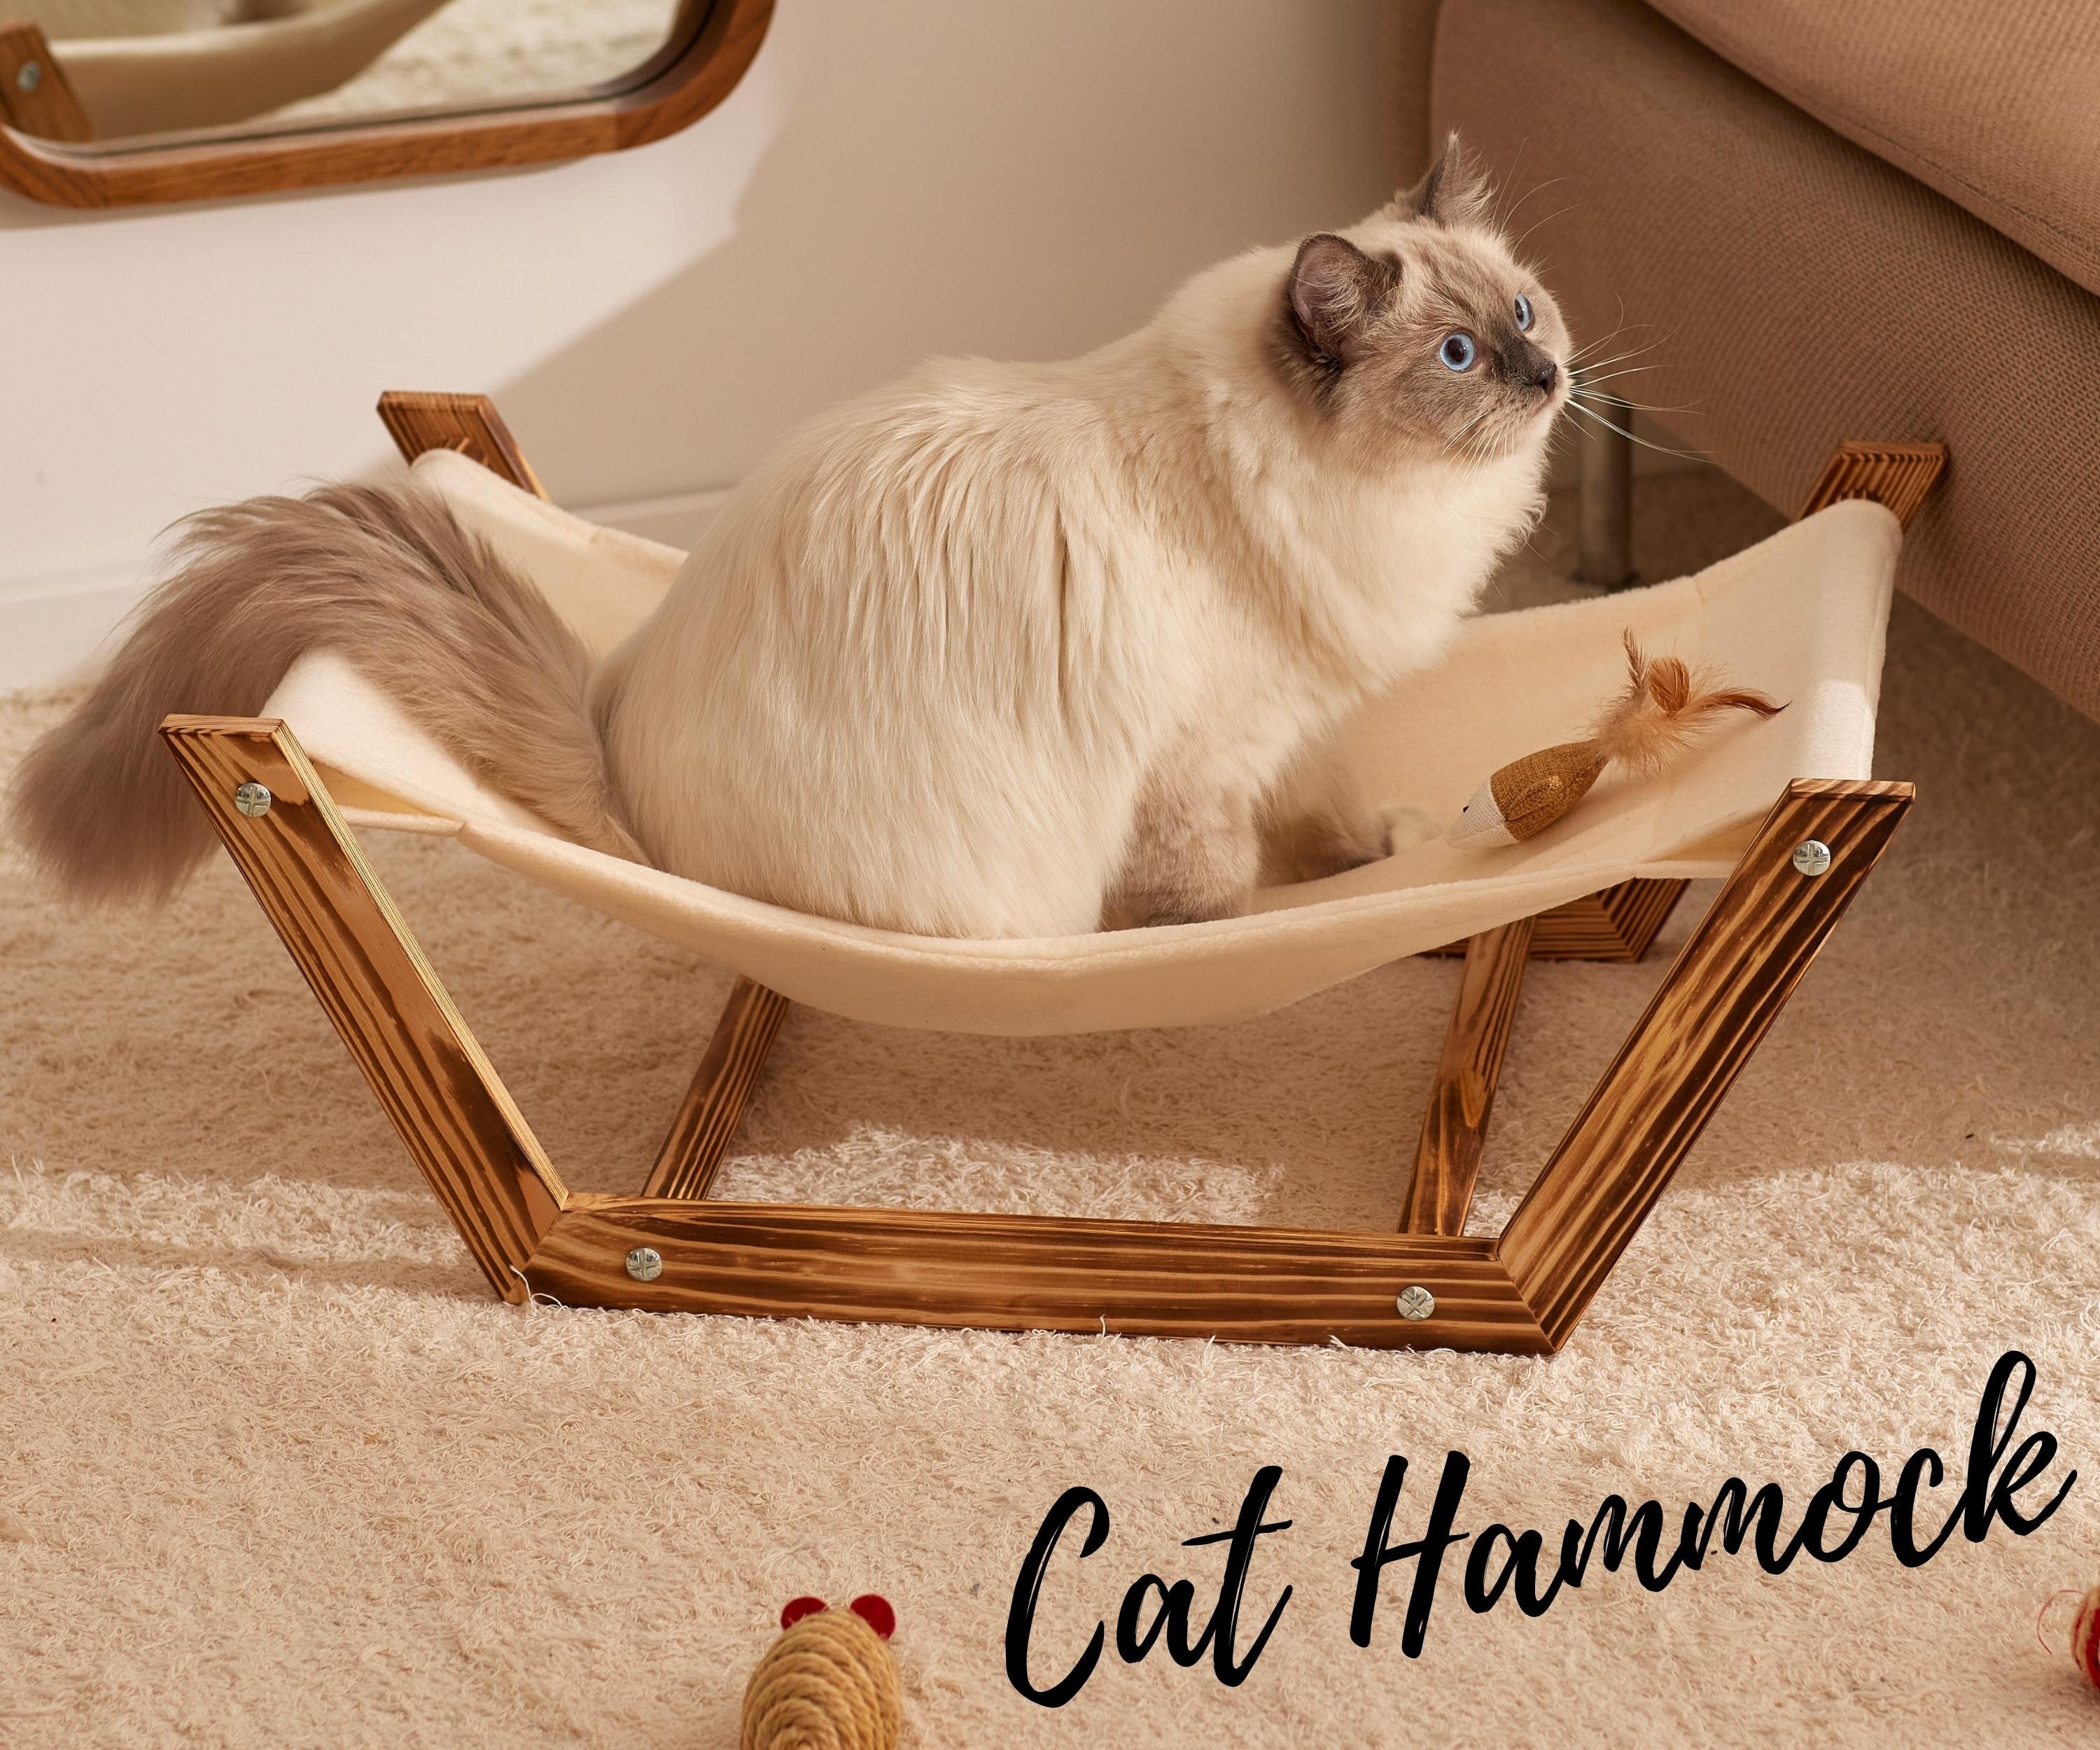 JKRED Wooden Base Cat Hammock Soft Plush Cat Bed Attractive and Sturdy Floor Pet Perch Ship from USA 